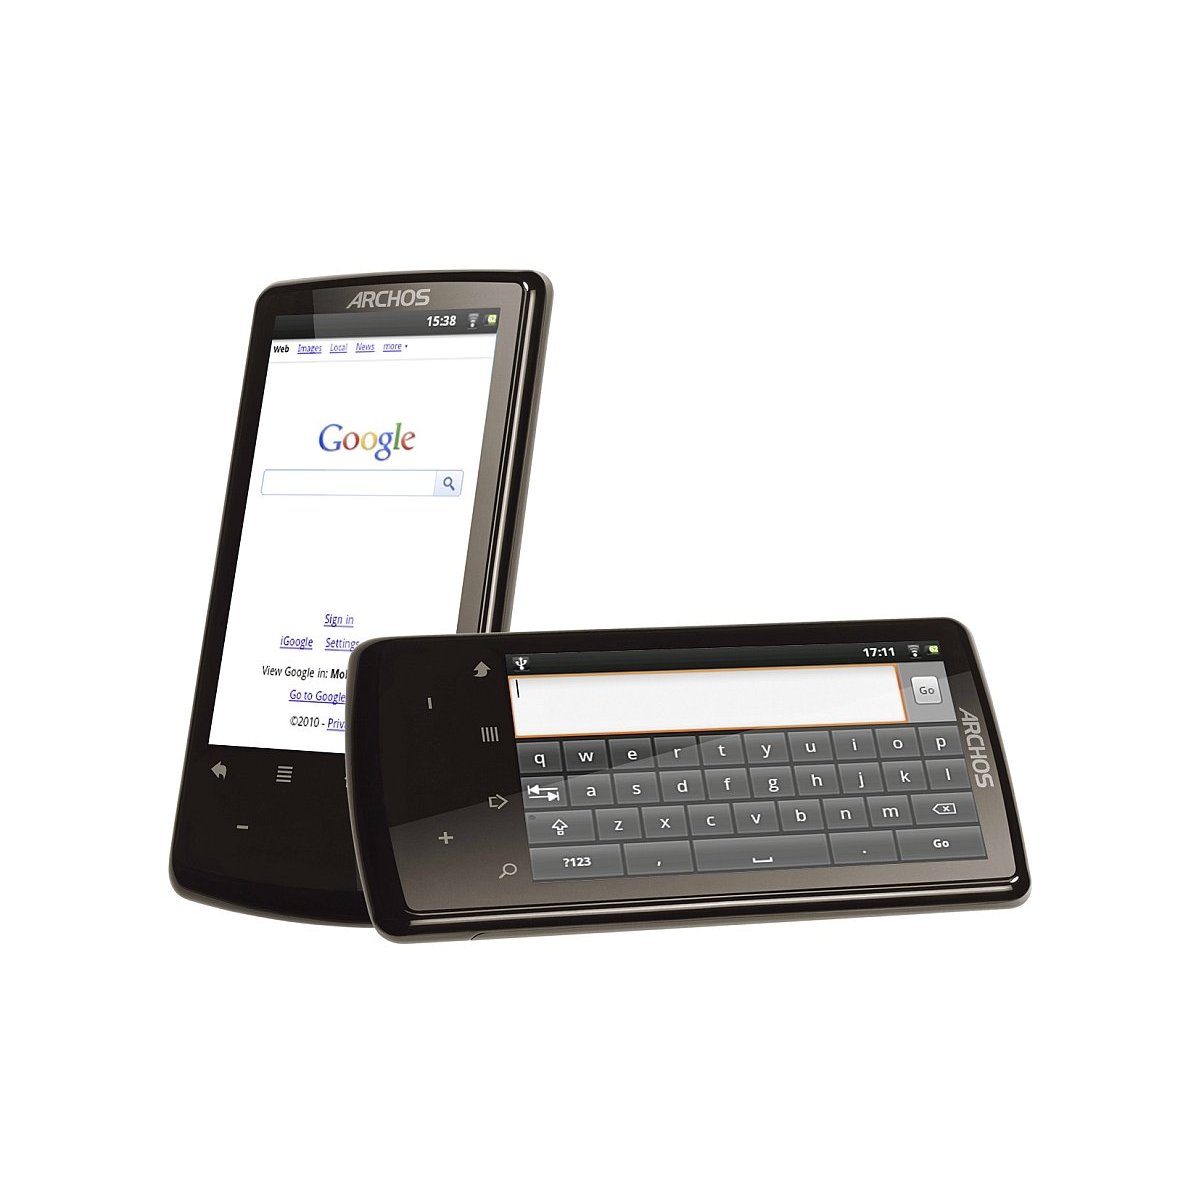 http://thetechjournal.com/wp-content/uploads/images/1107/1309779778-archos-32-32inch-internet-tablet-powered-by-android-3.jpg